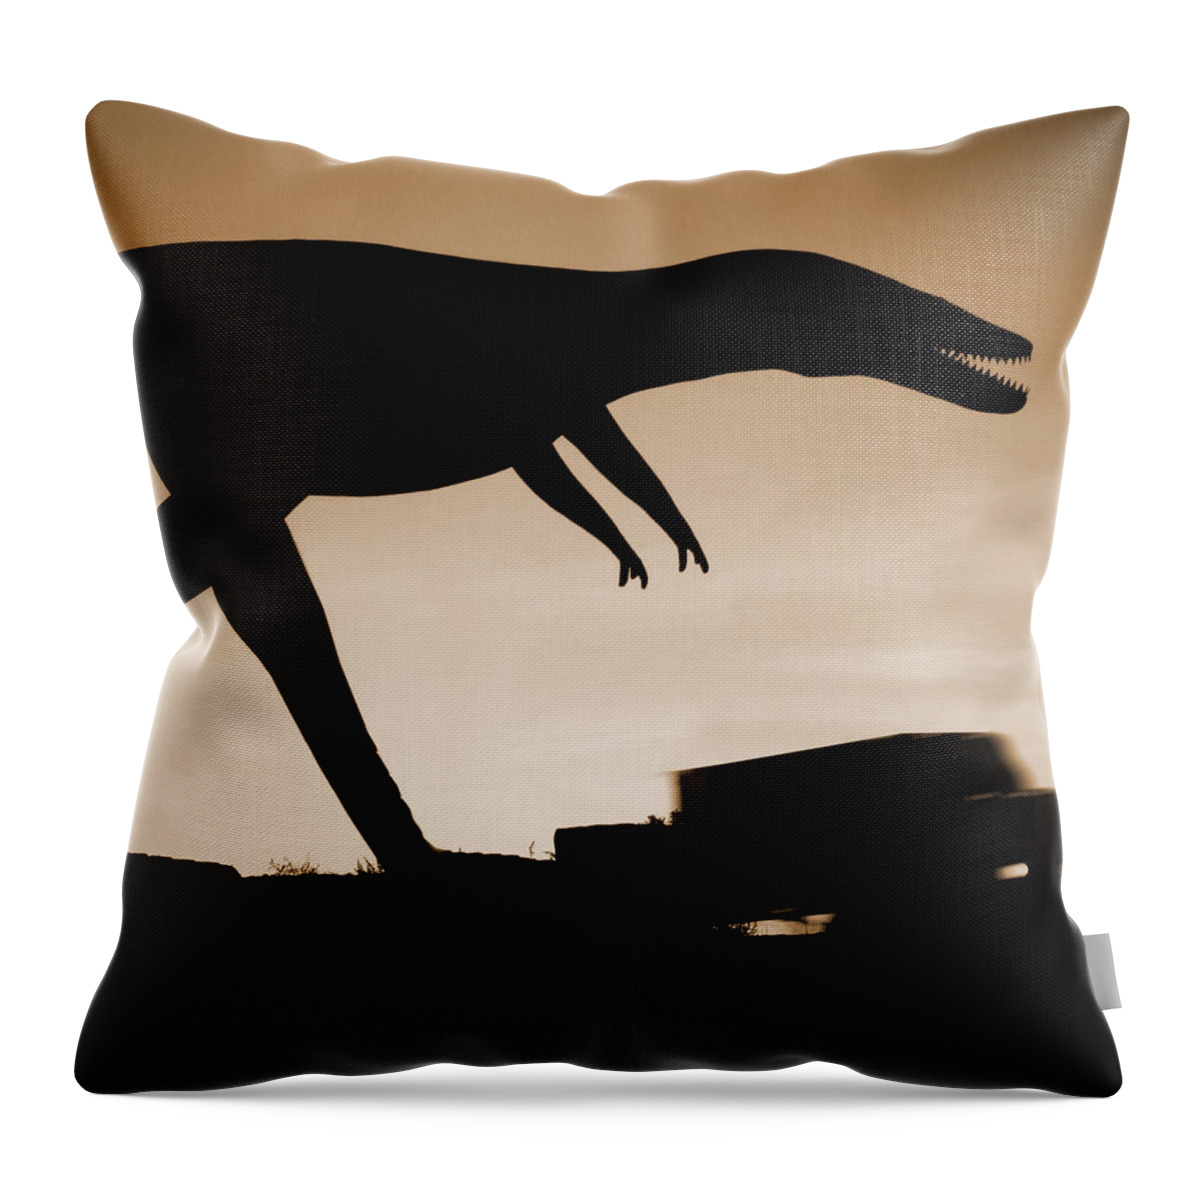 Travel Throw Pillow featuring the photograph Route 66 - Lost Dinosaur by Mike McGlothlen